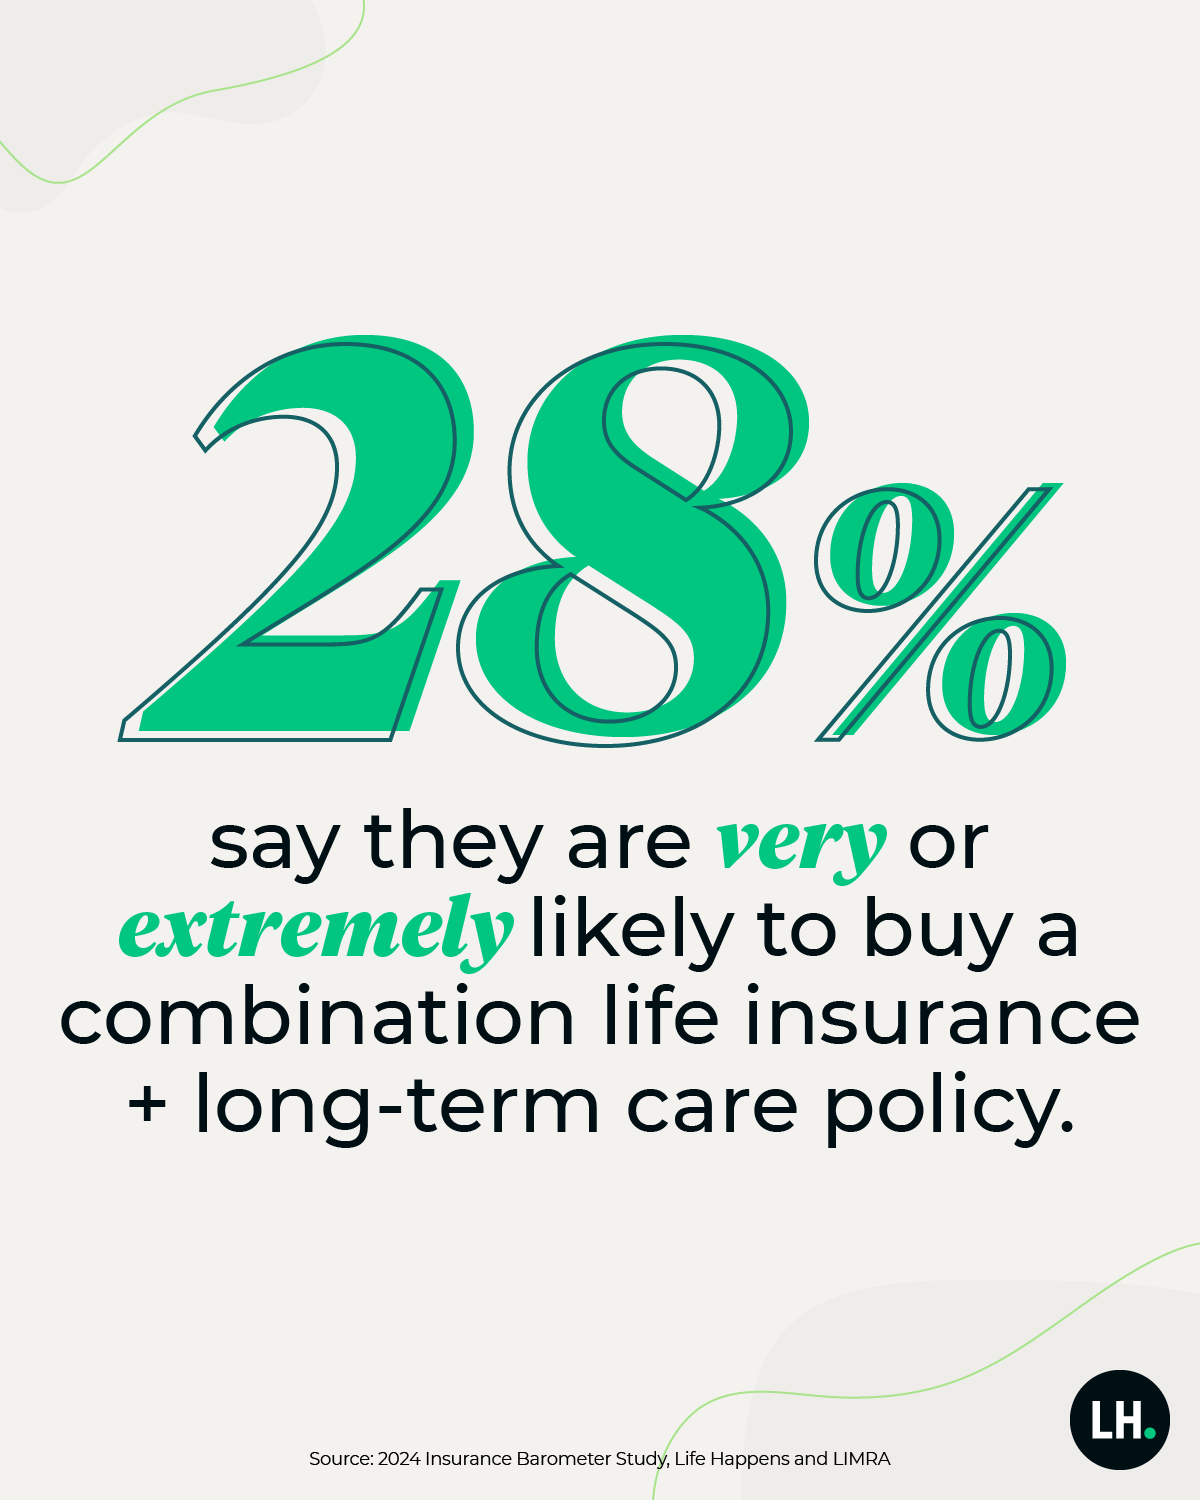 28% say they are “very” or “extremely” likely to buy a combination life insurance + long-term care policy.